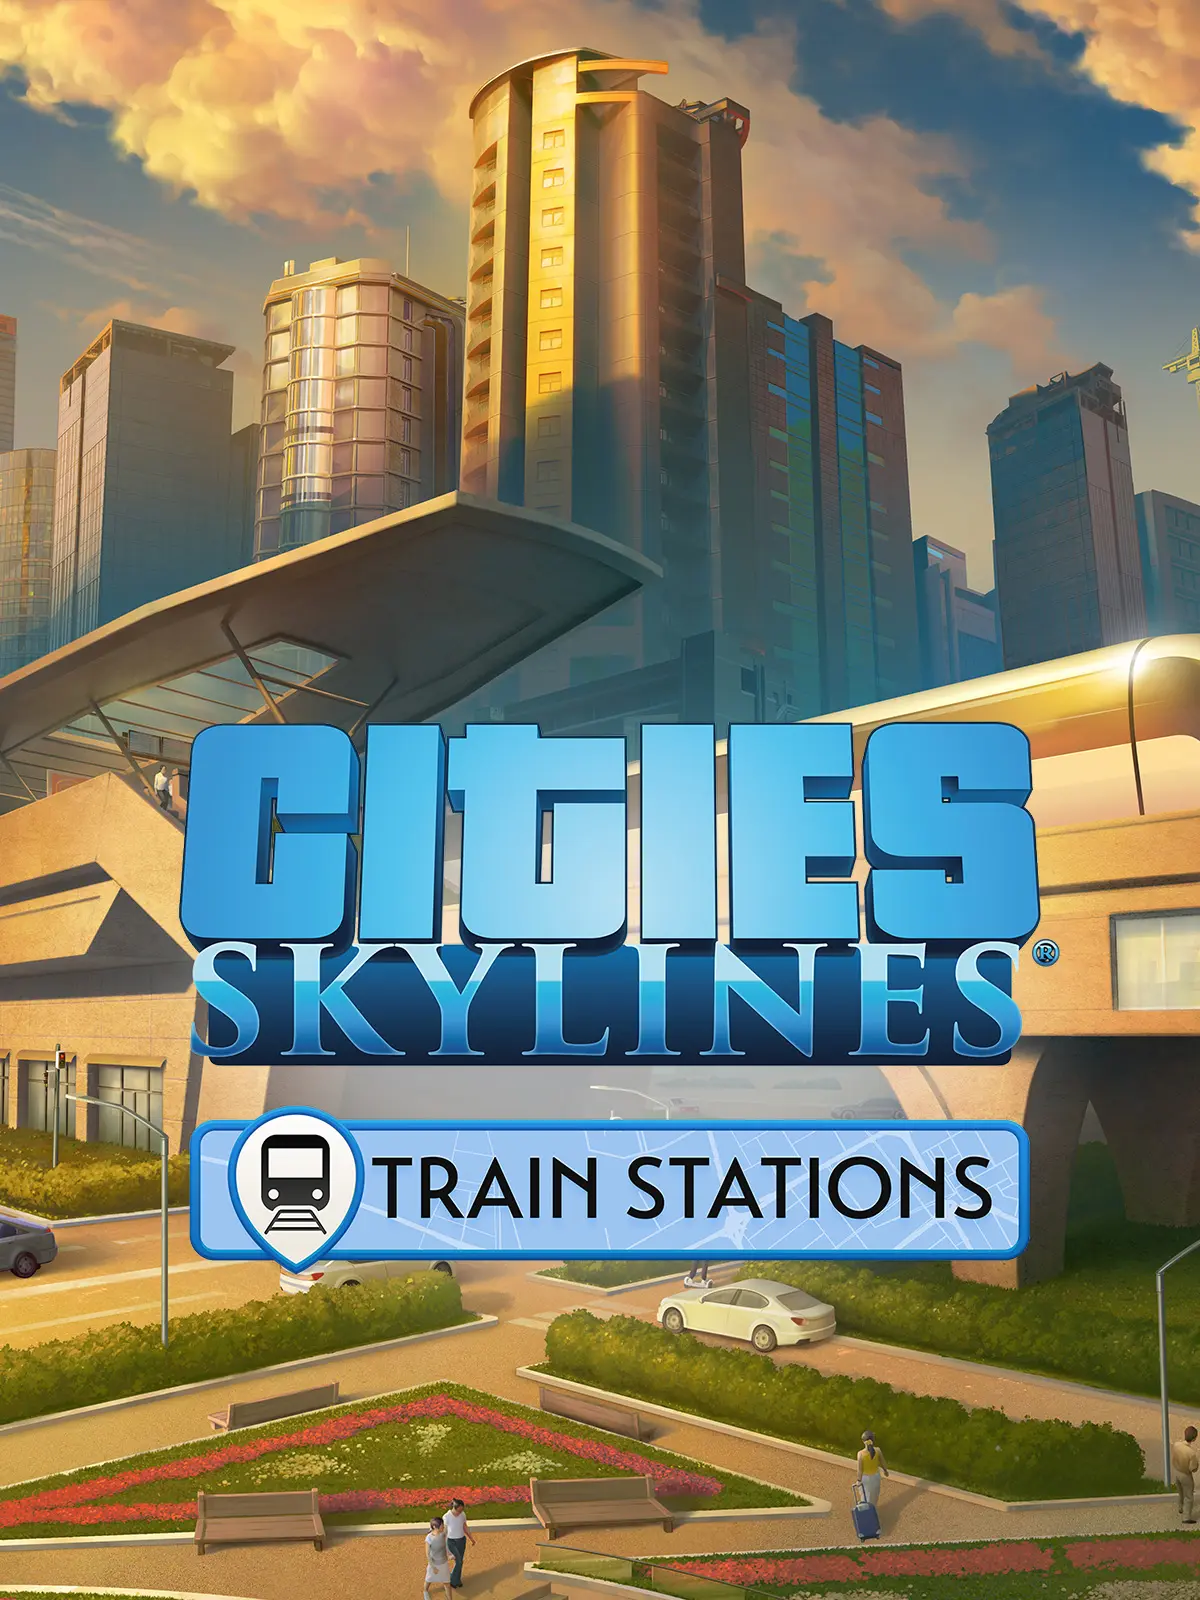 Cities: Skylines - Content Creator Pack: Train Stations DLC (TR) (Xbox One / Xbox Series X|S) - Xbox Live - Digital Code